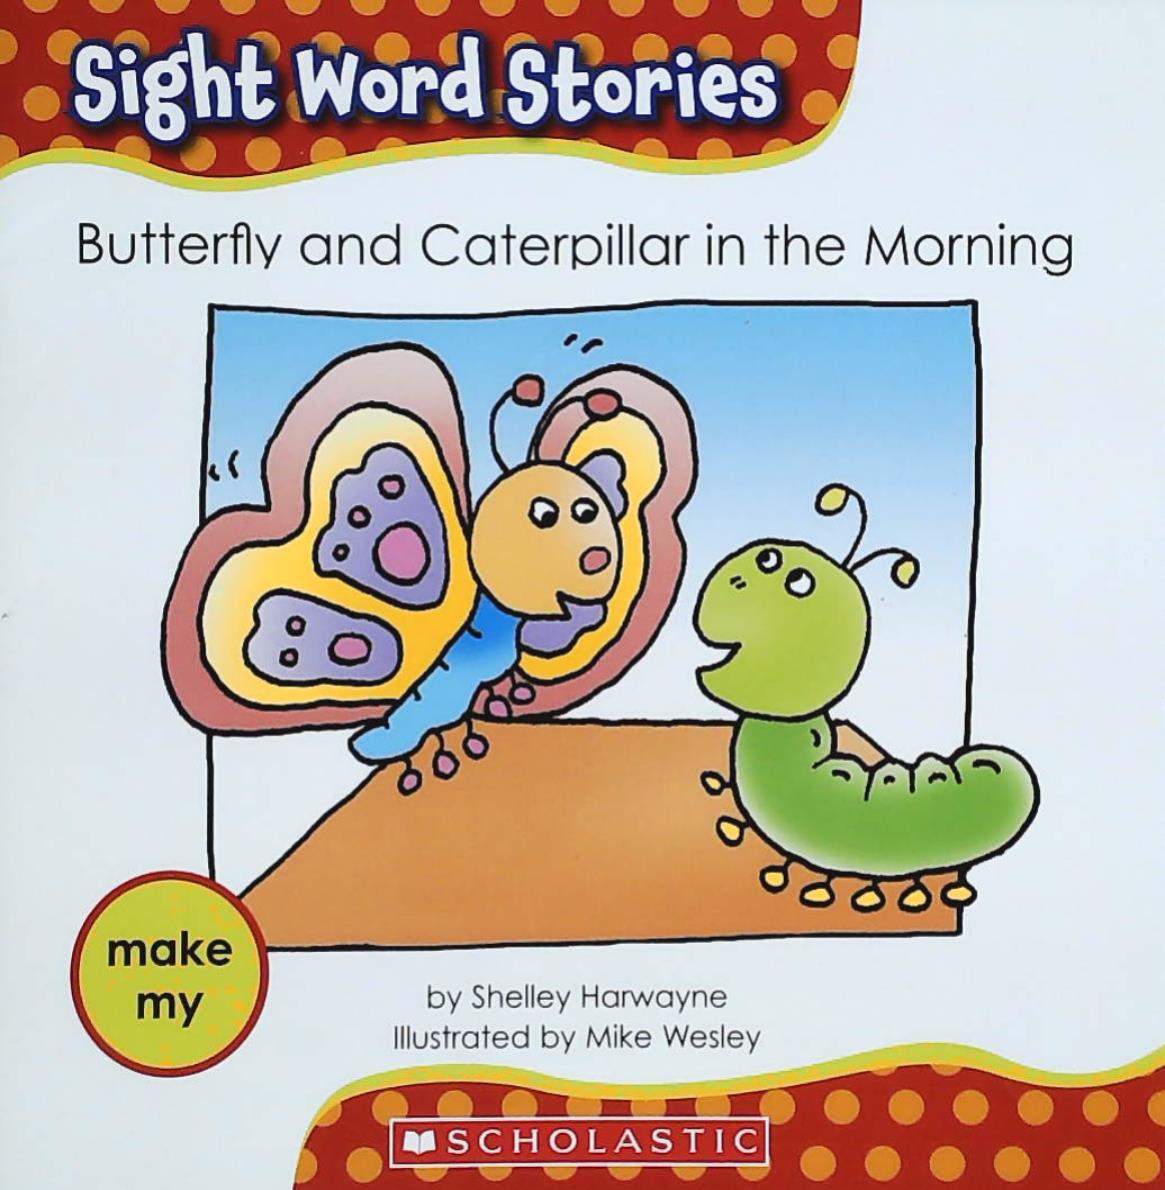 Livre ISBN 0545167663 Sight Word Stories : Butterfly and Caterpillar in the Morning (Shelley Harwayne)